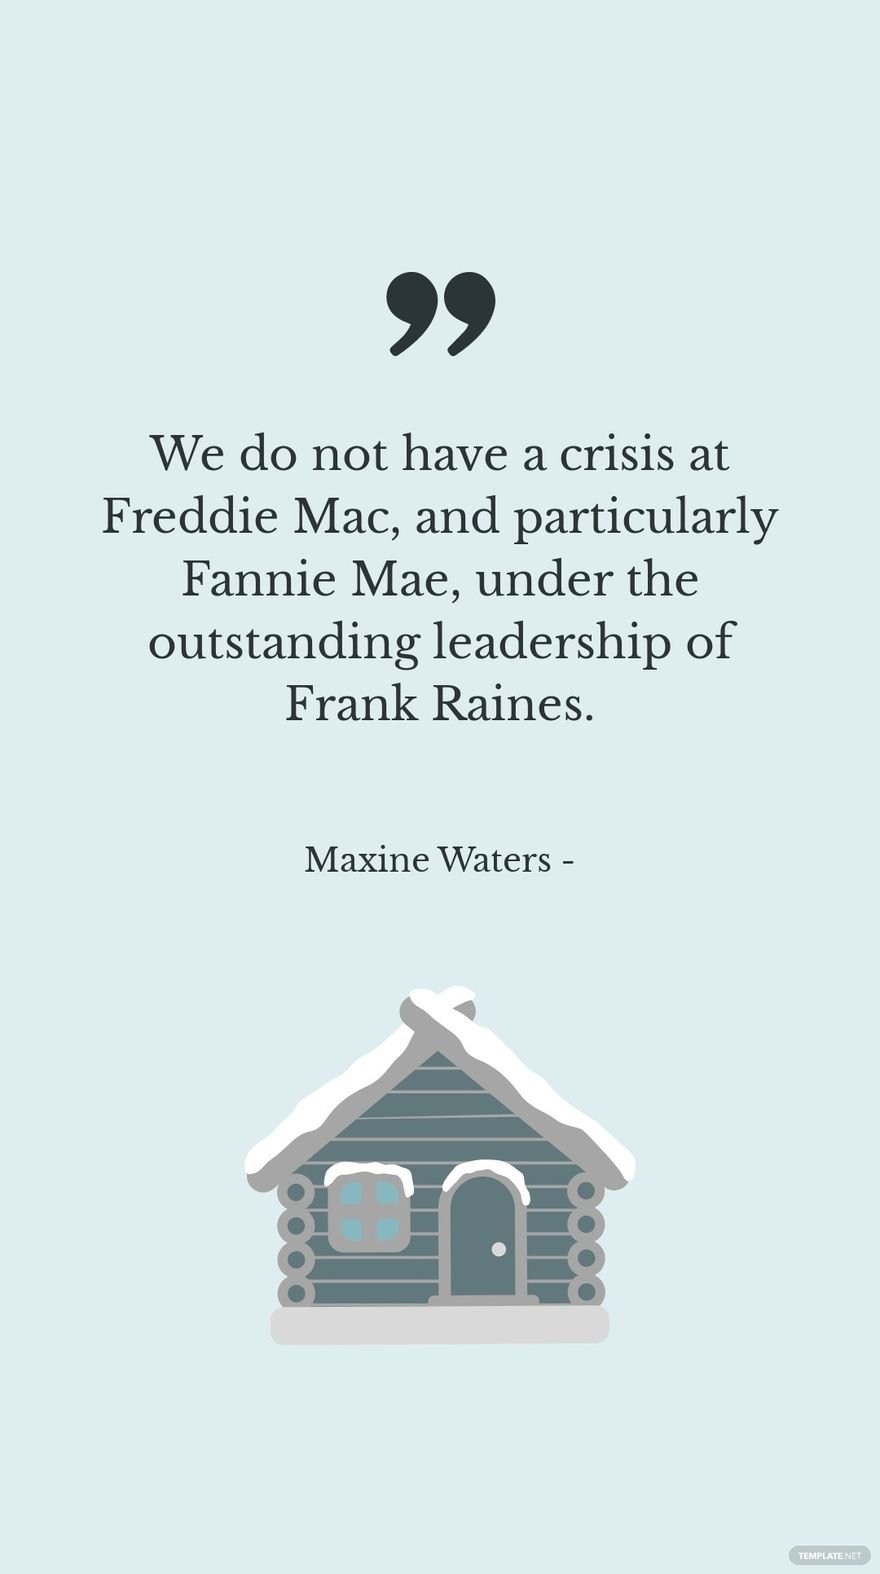 Maxine Waters - We do not have a crisis at Freddie Mac, and particularly Fannie Mae, under the outstanding leadership of Frank Raines.